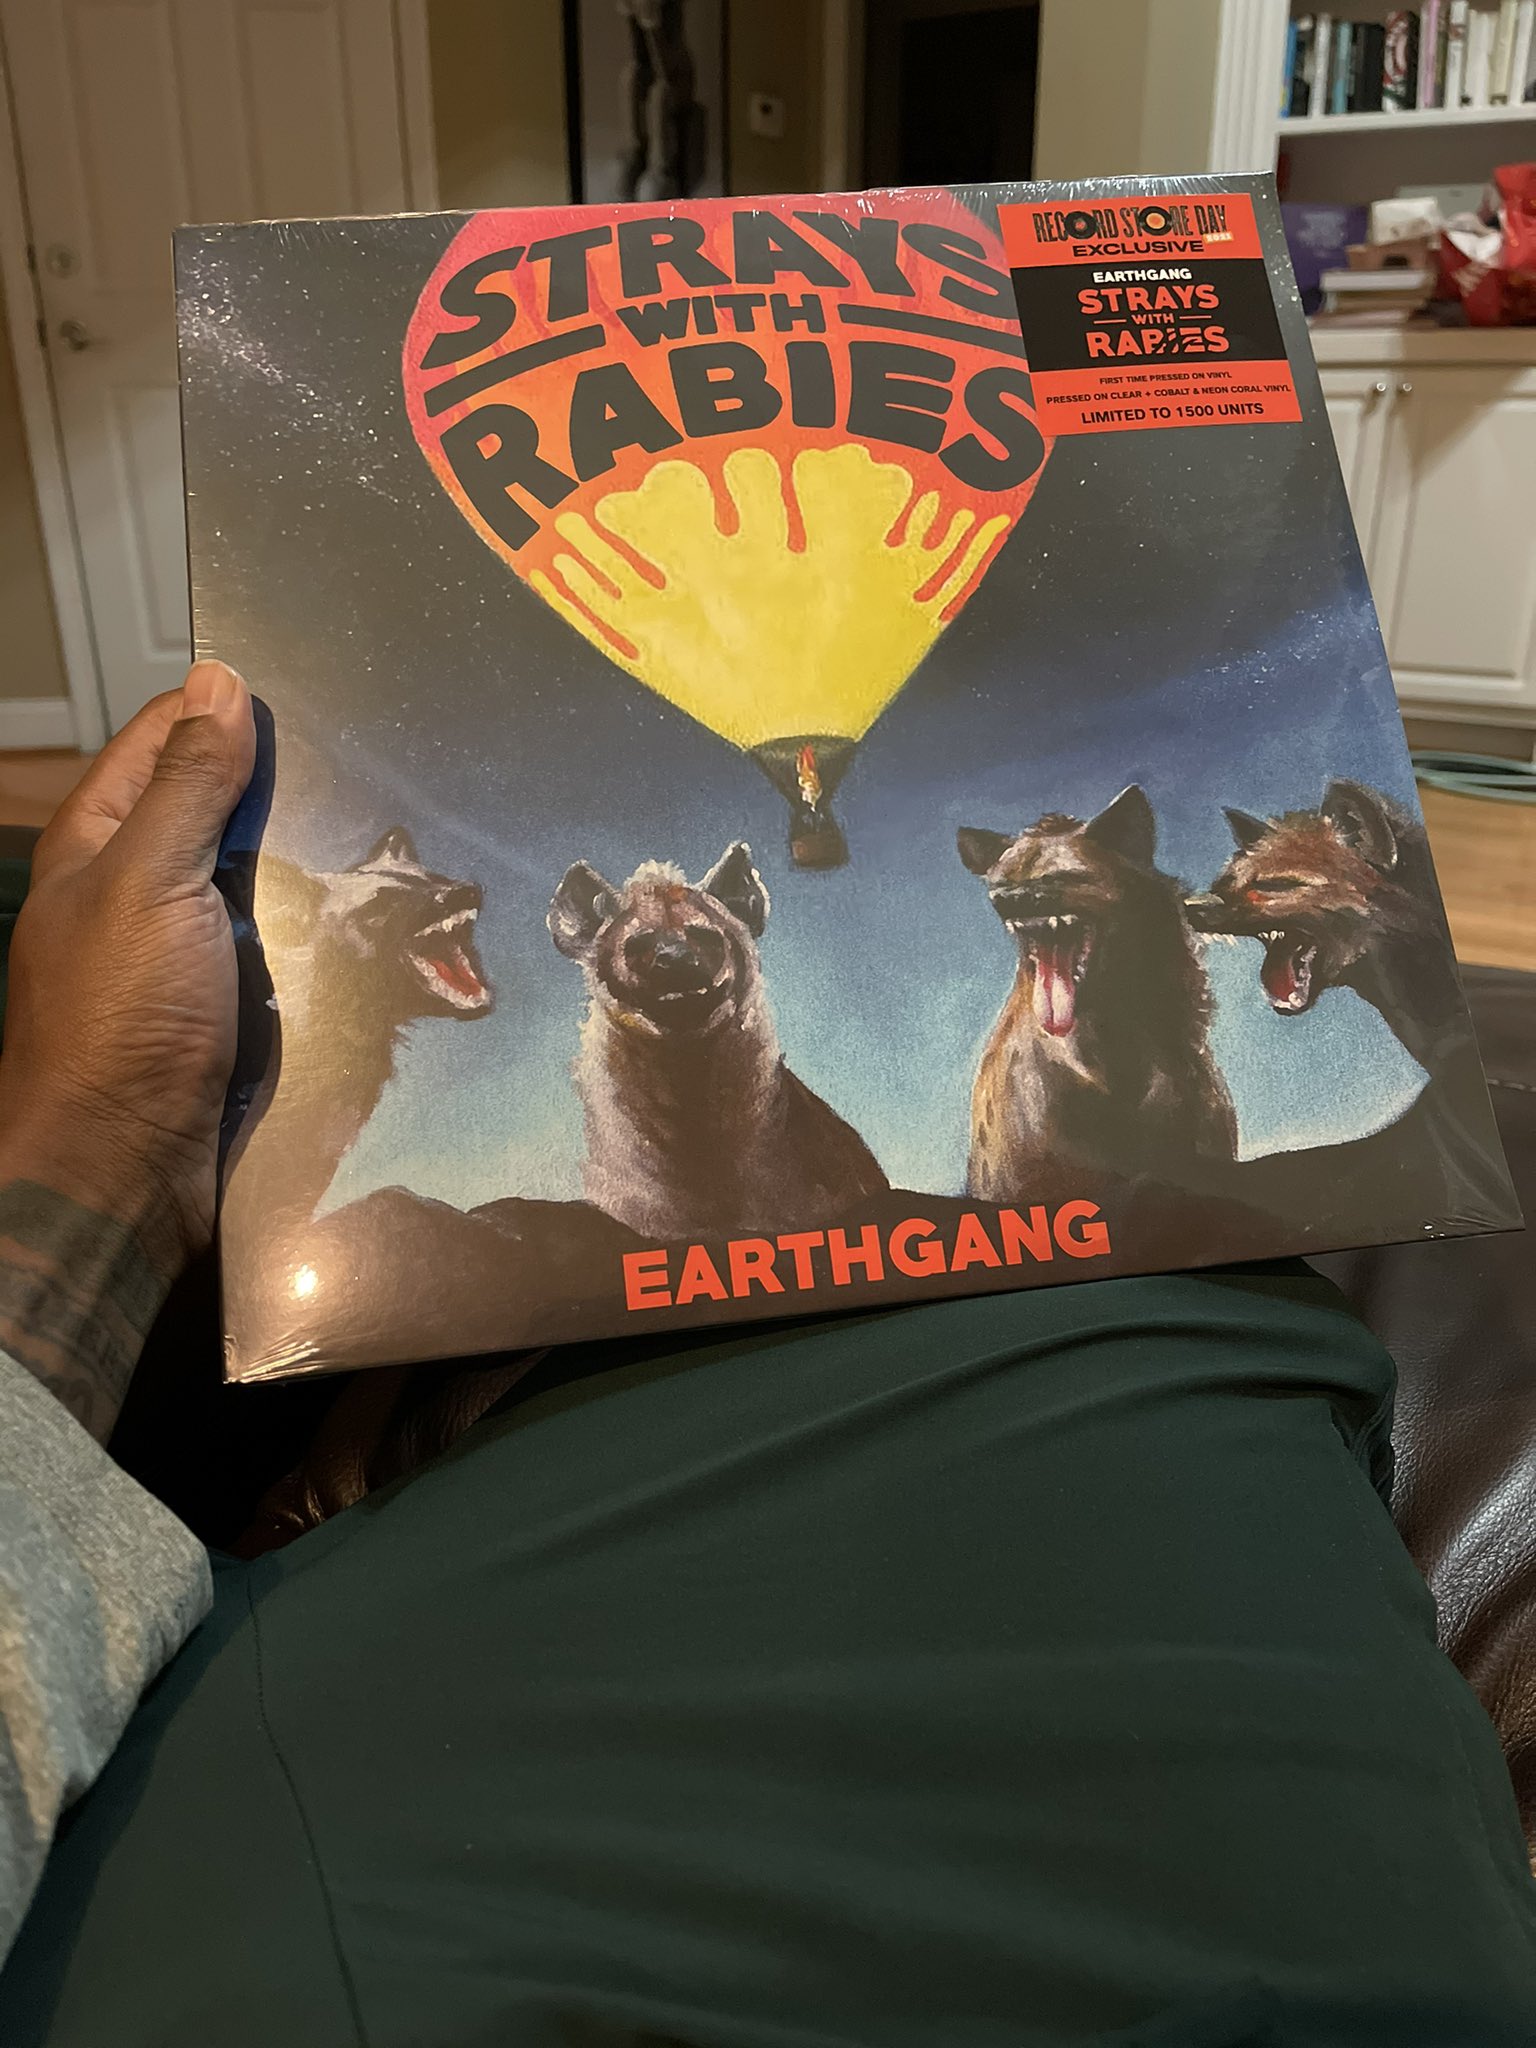 EARTHGANG #GHETTOGODS OUT NOW! on Twitter: "Strays With Rabies OTW! Who's cropping? https://t.co/vDtDb2G0Dn" / Twitter